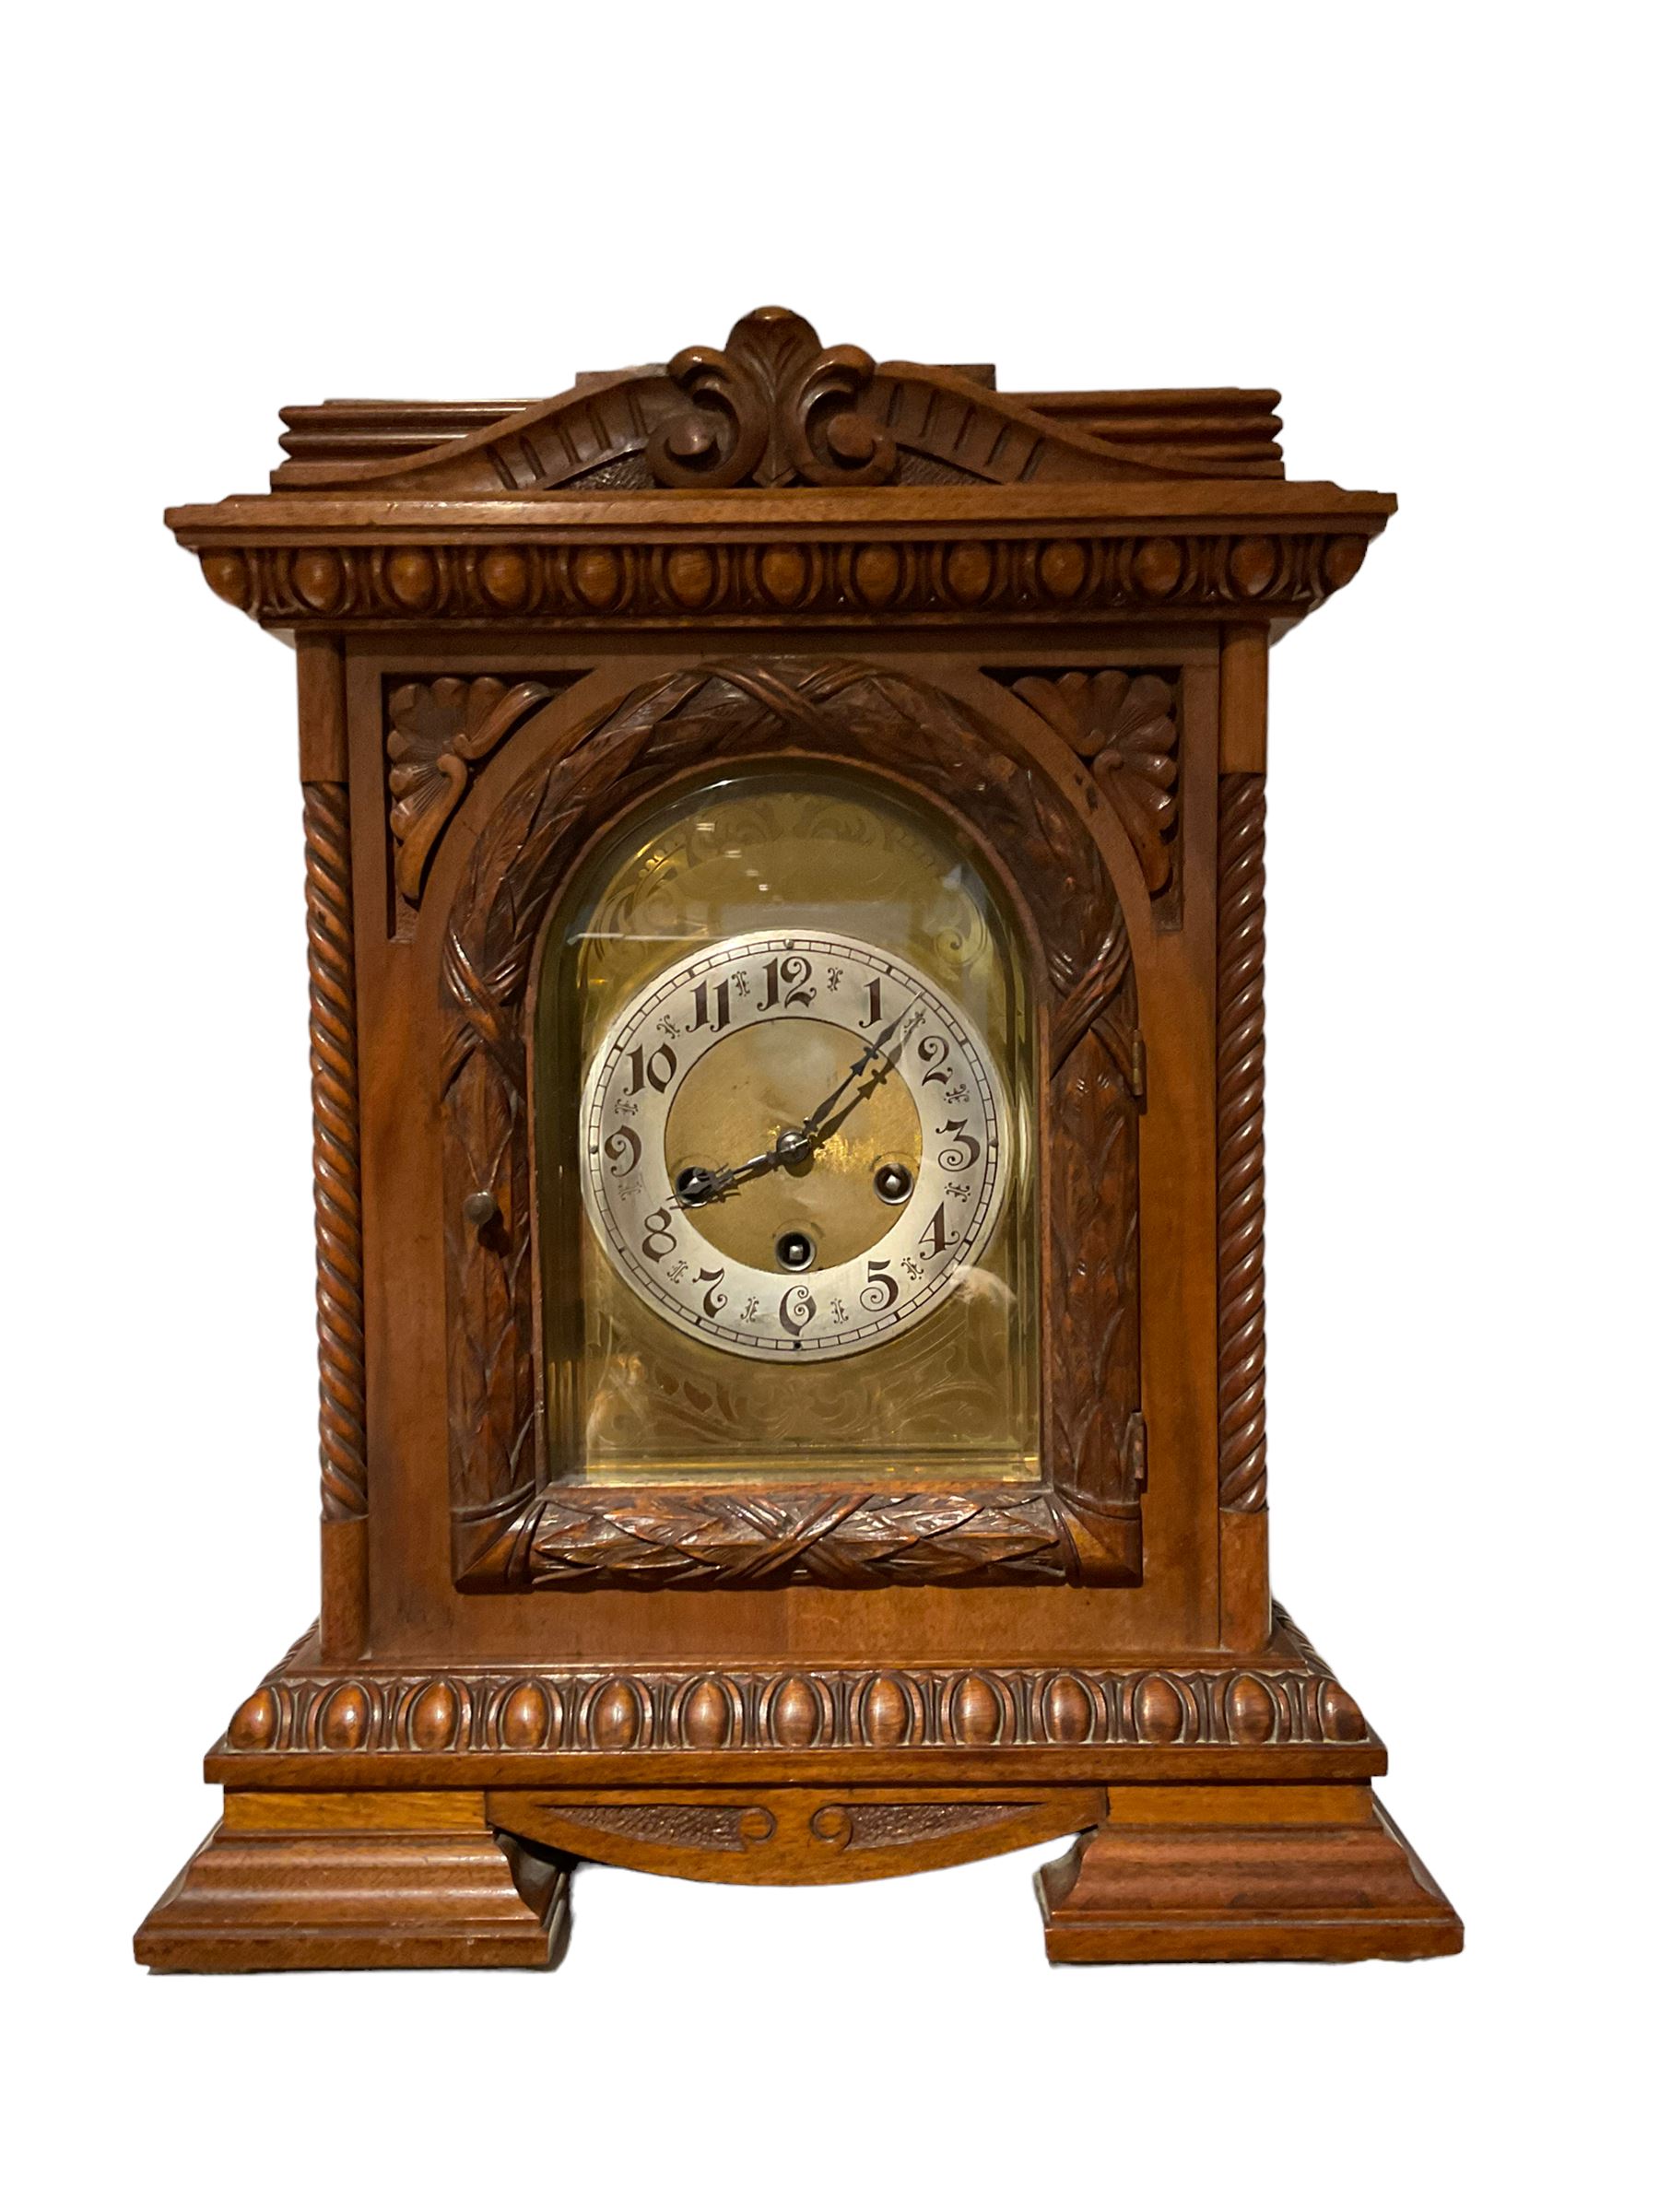 German - early 20th century 8-day chiming mantle clock in a carved oak case